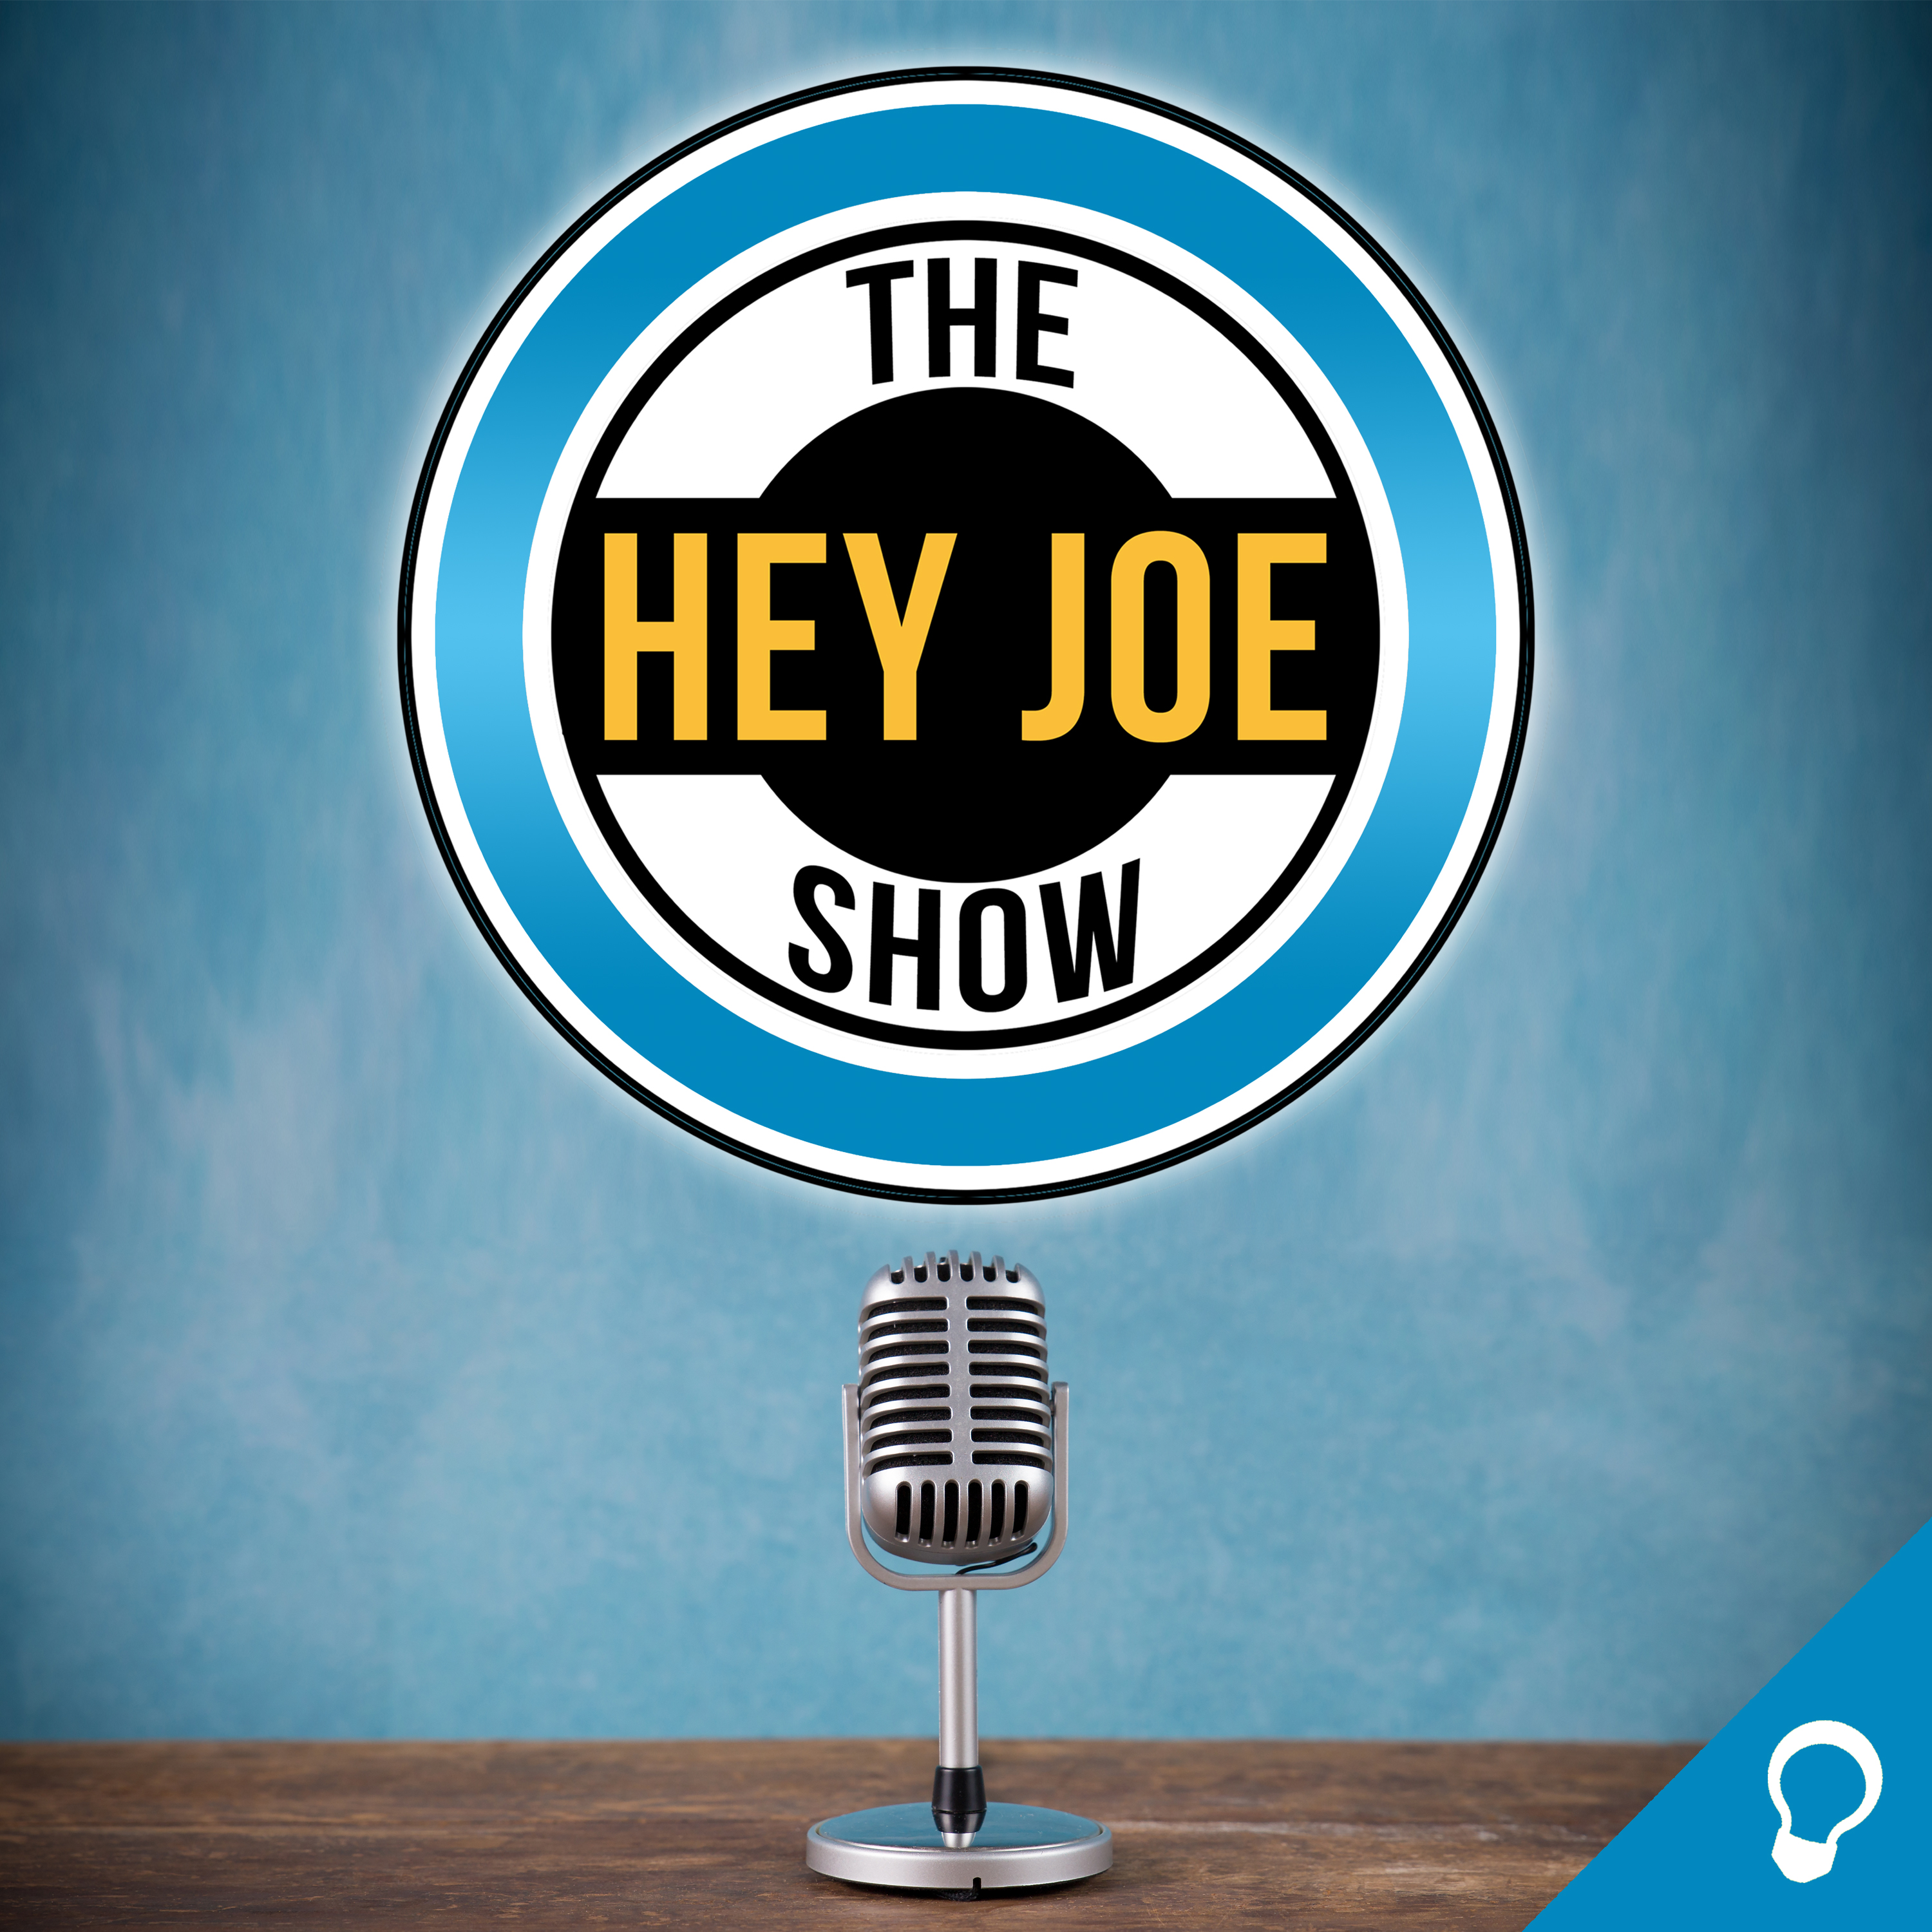 The Hey Joe Show: Straight Talk for Teens and Families in Today's Culture